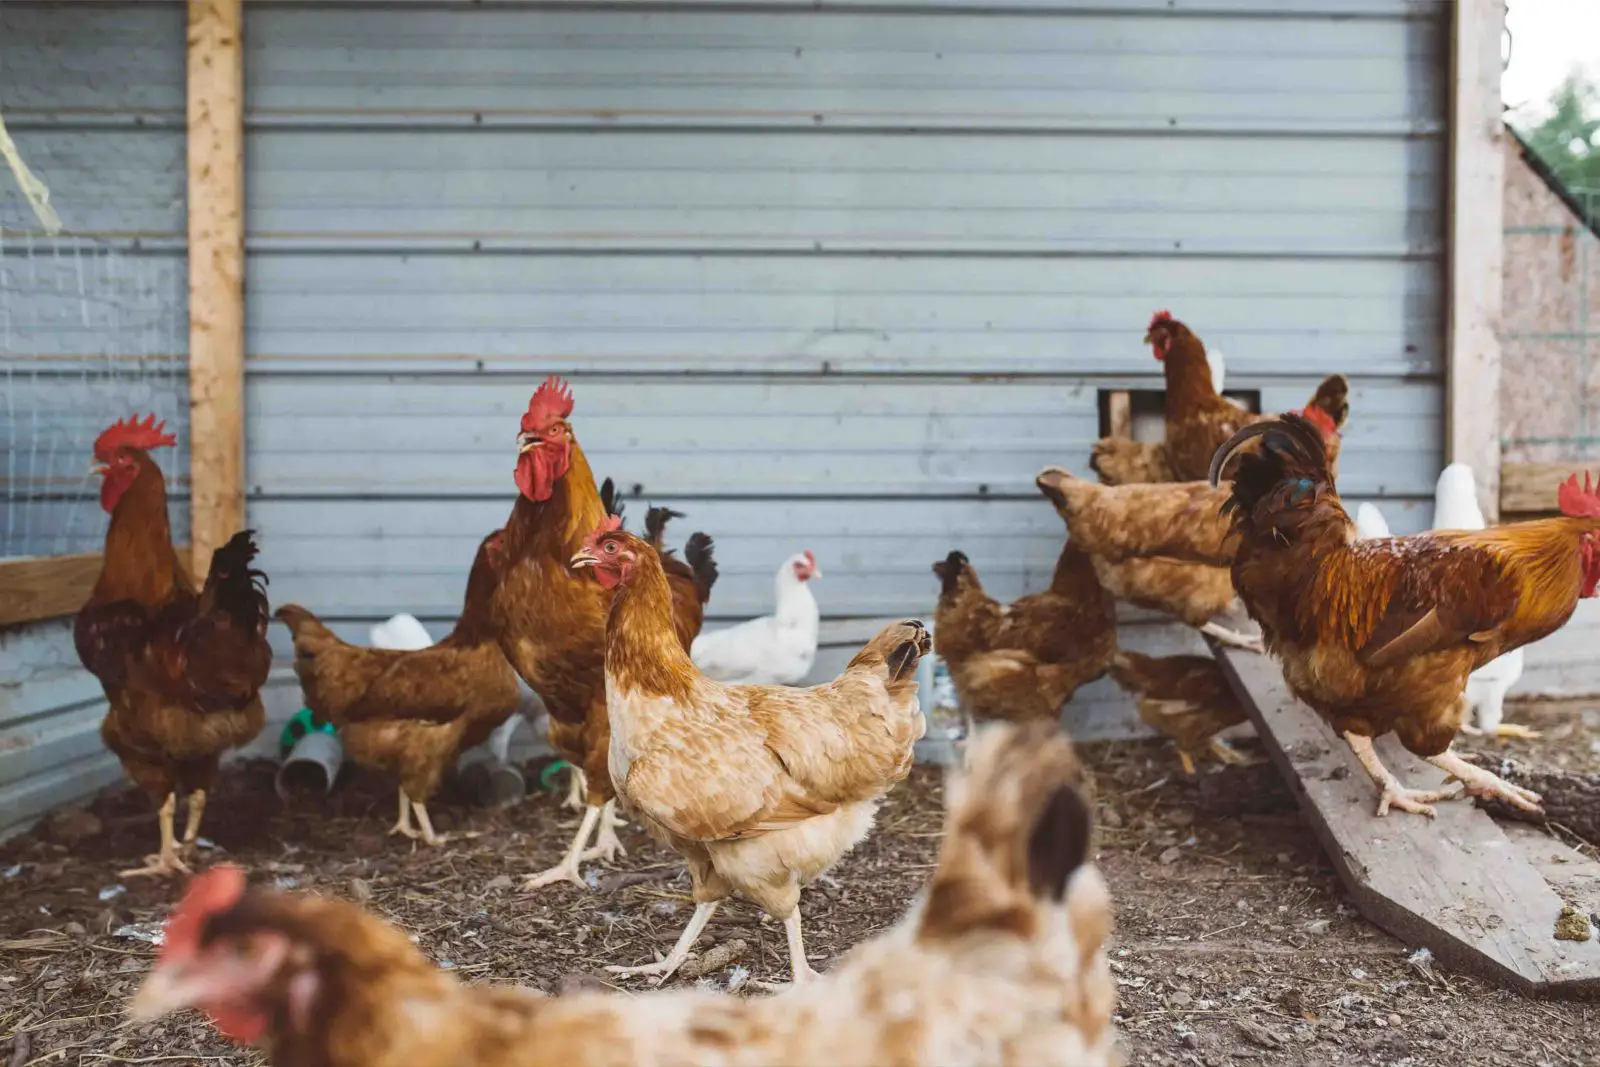 How can I start a small chicken farm?